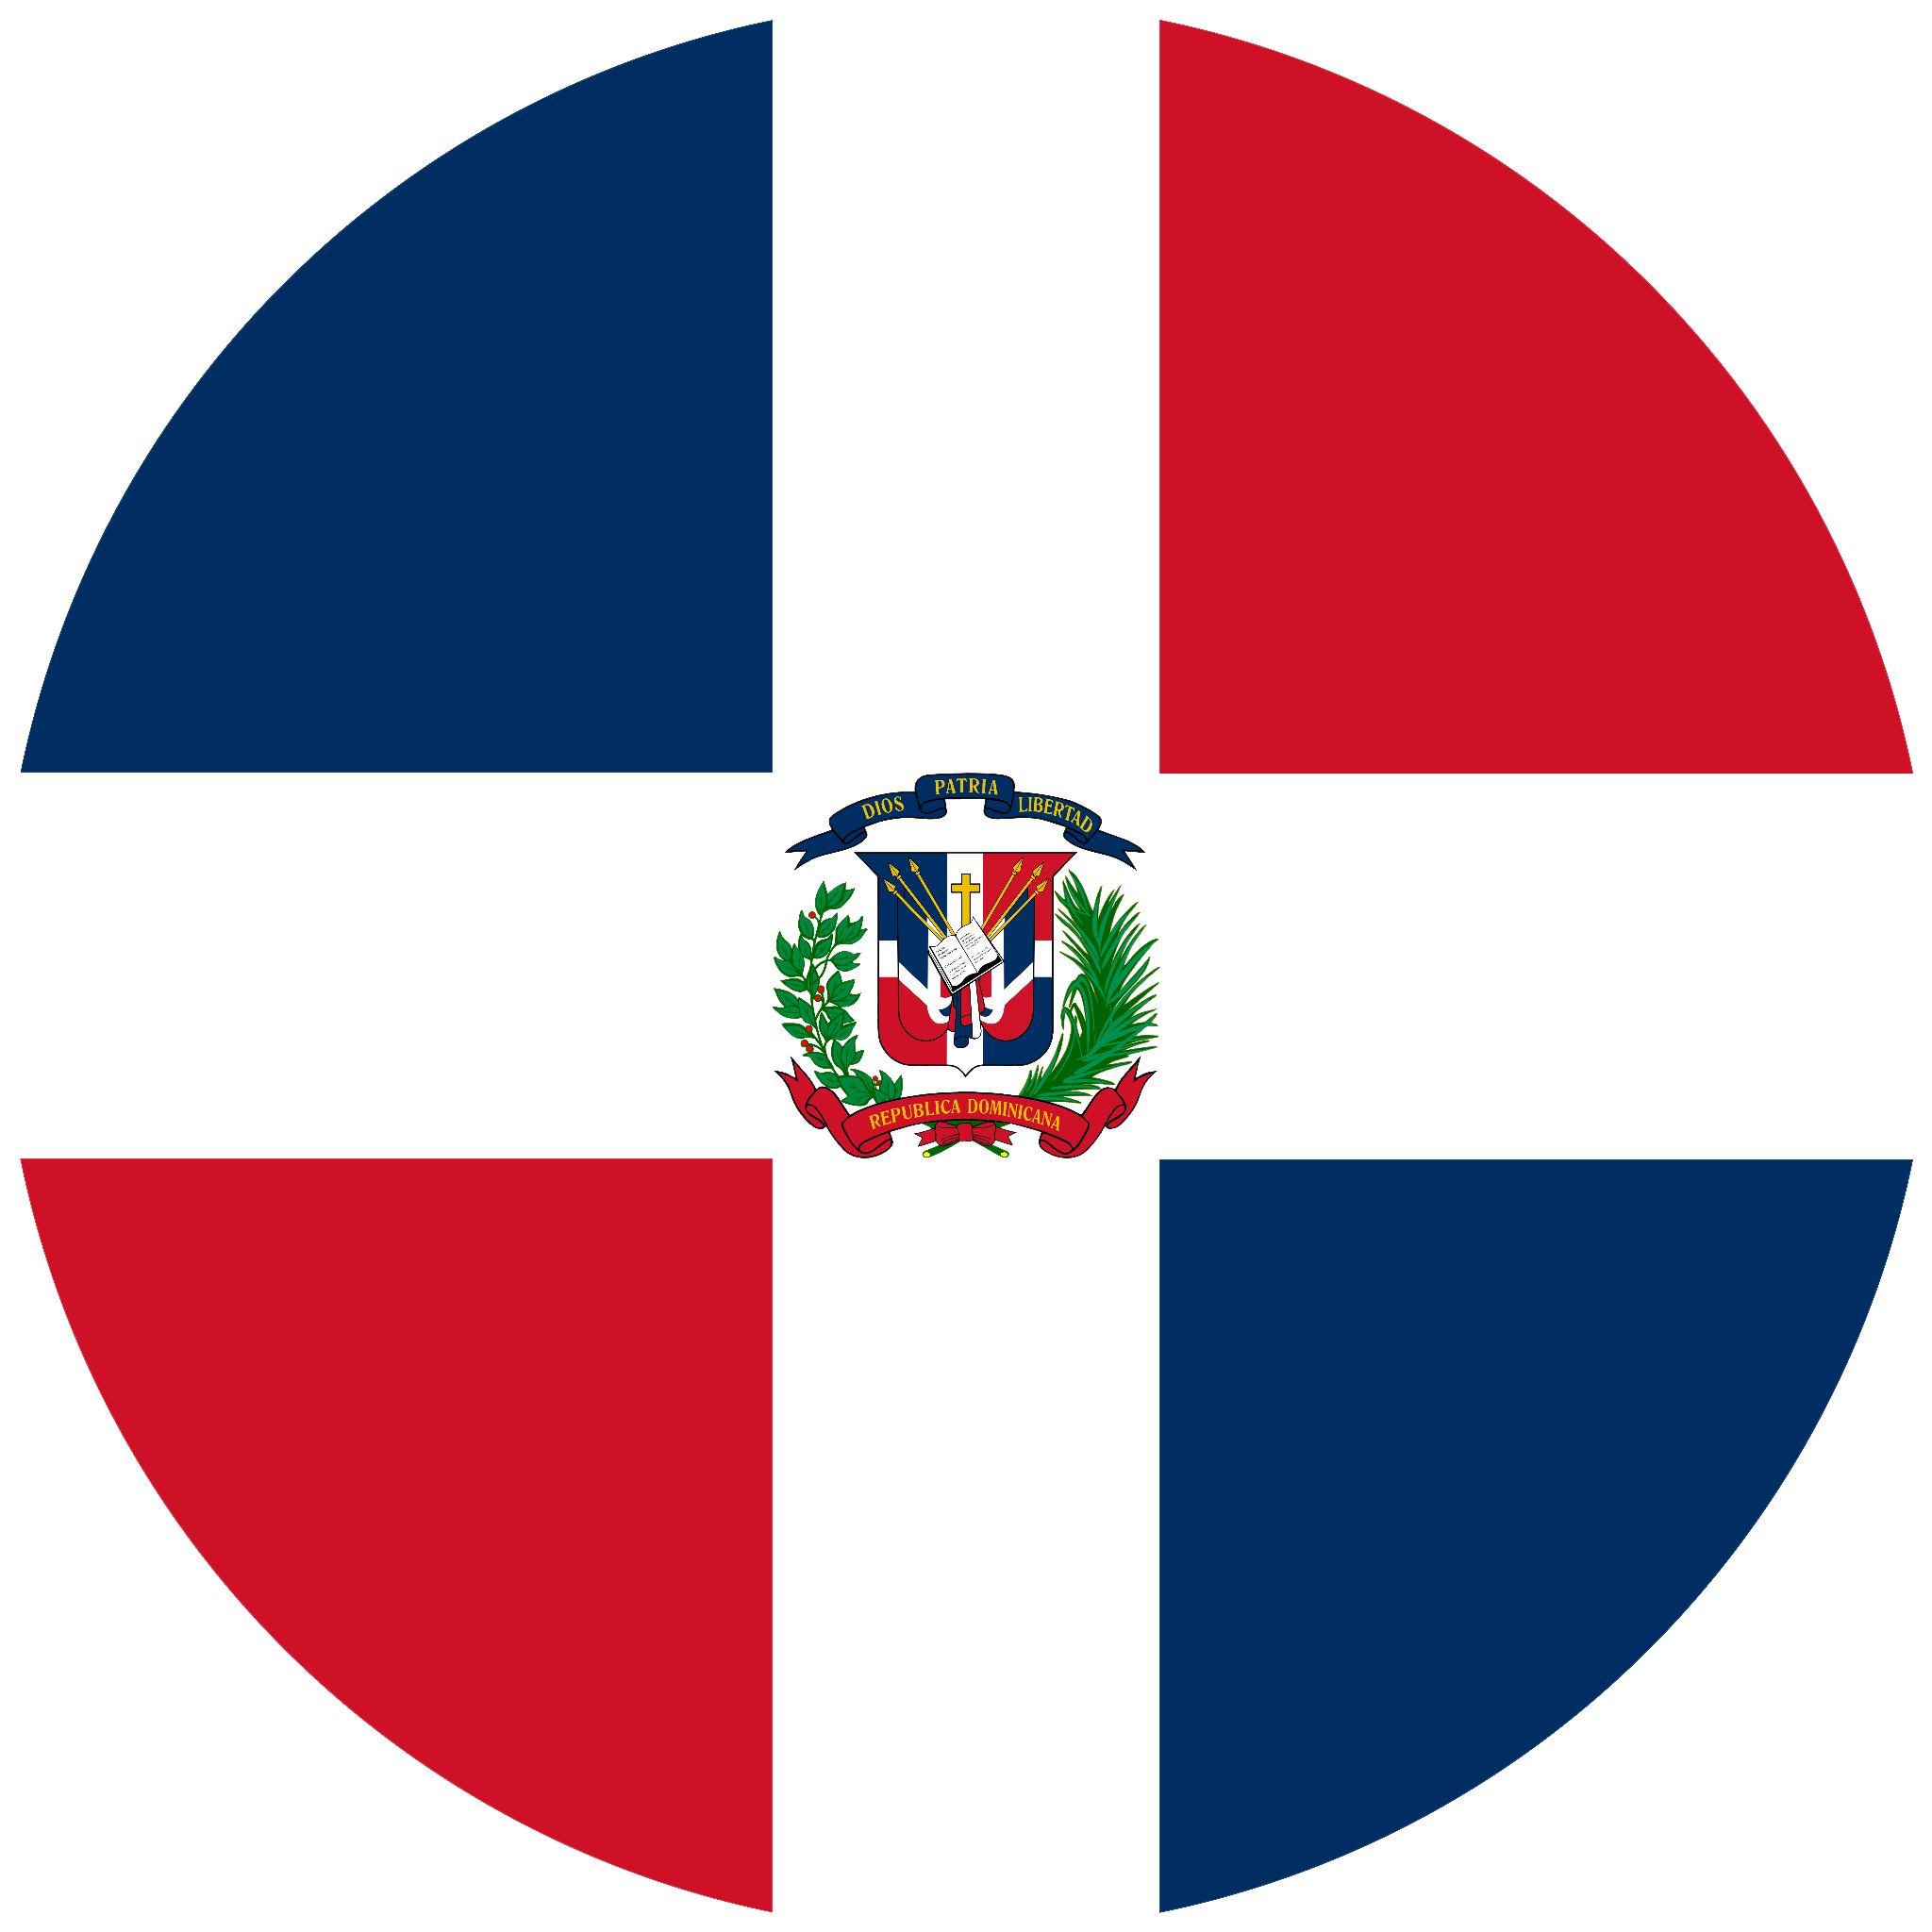 The flag of the Dominican Republic, adorned with vibrant blue, red, and white elements, tells a tale of historical significance and national pride.